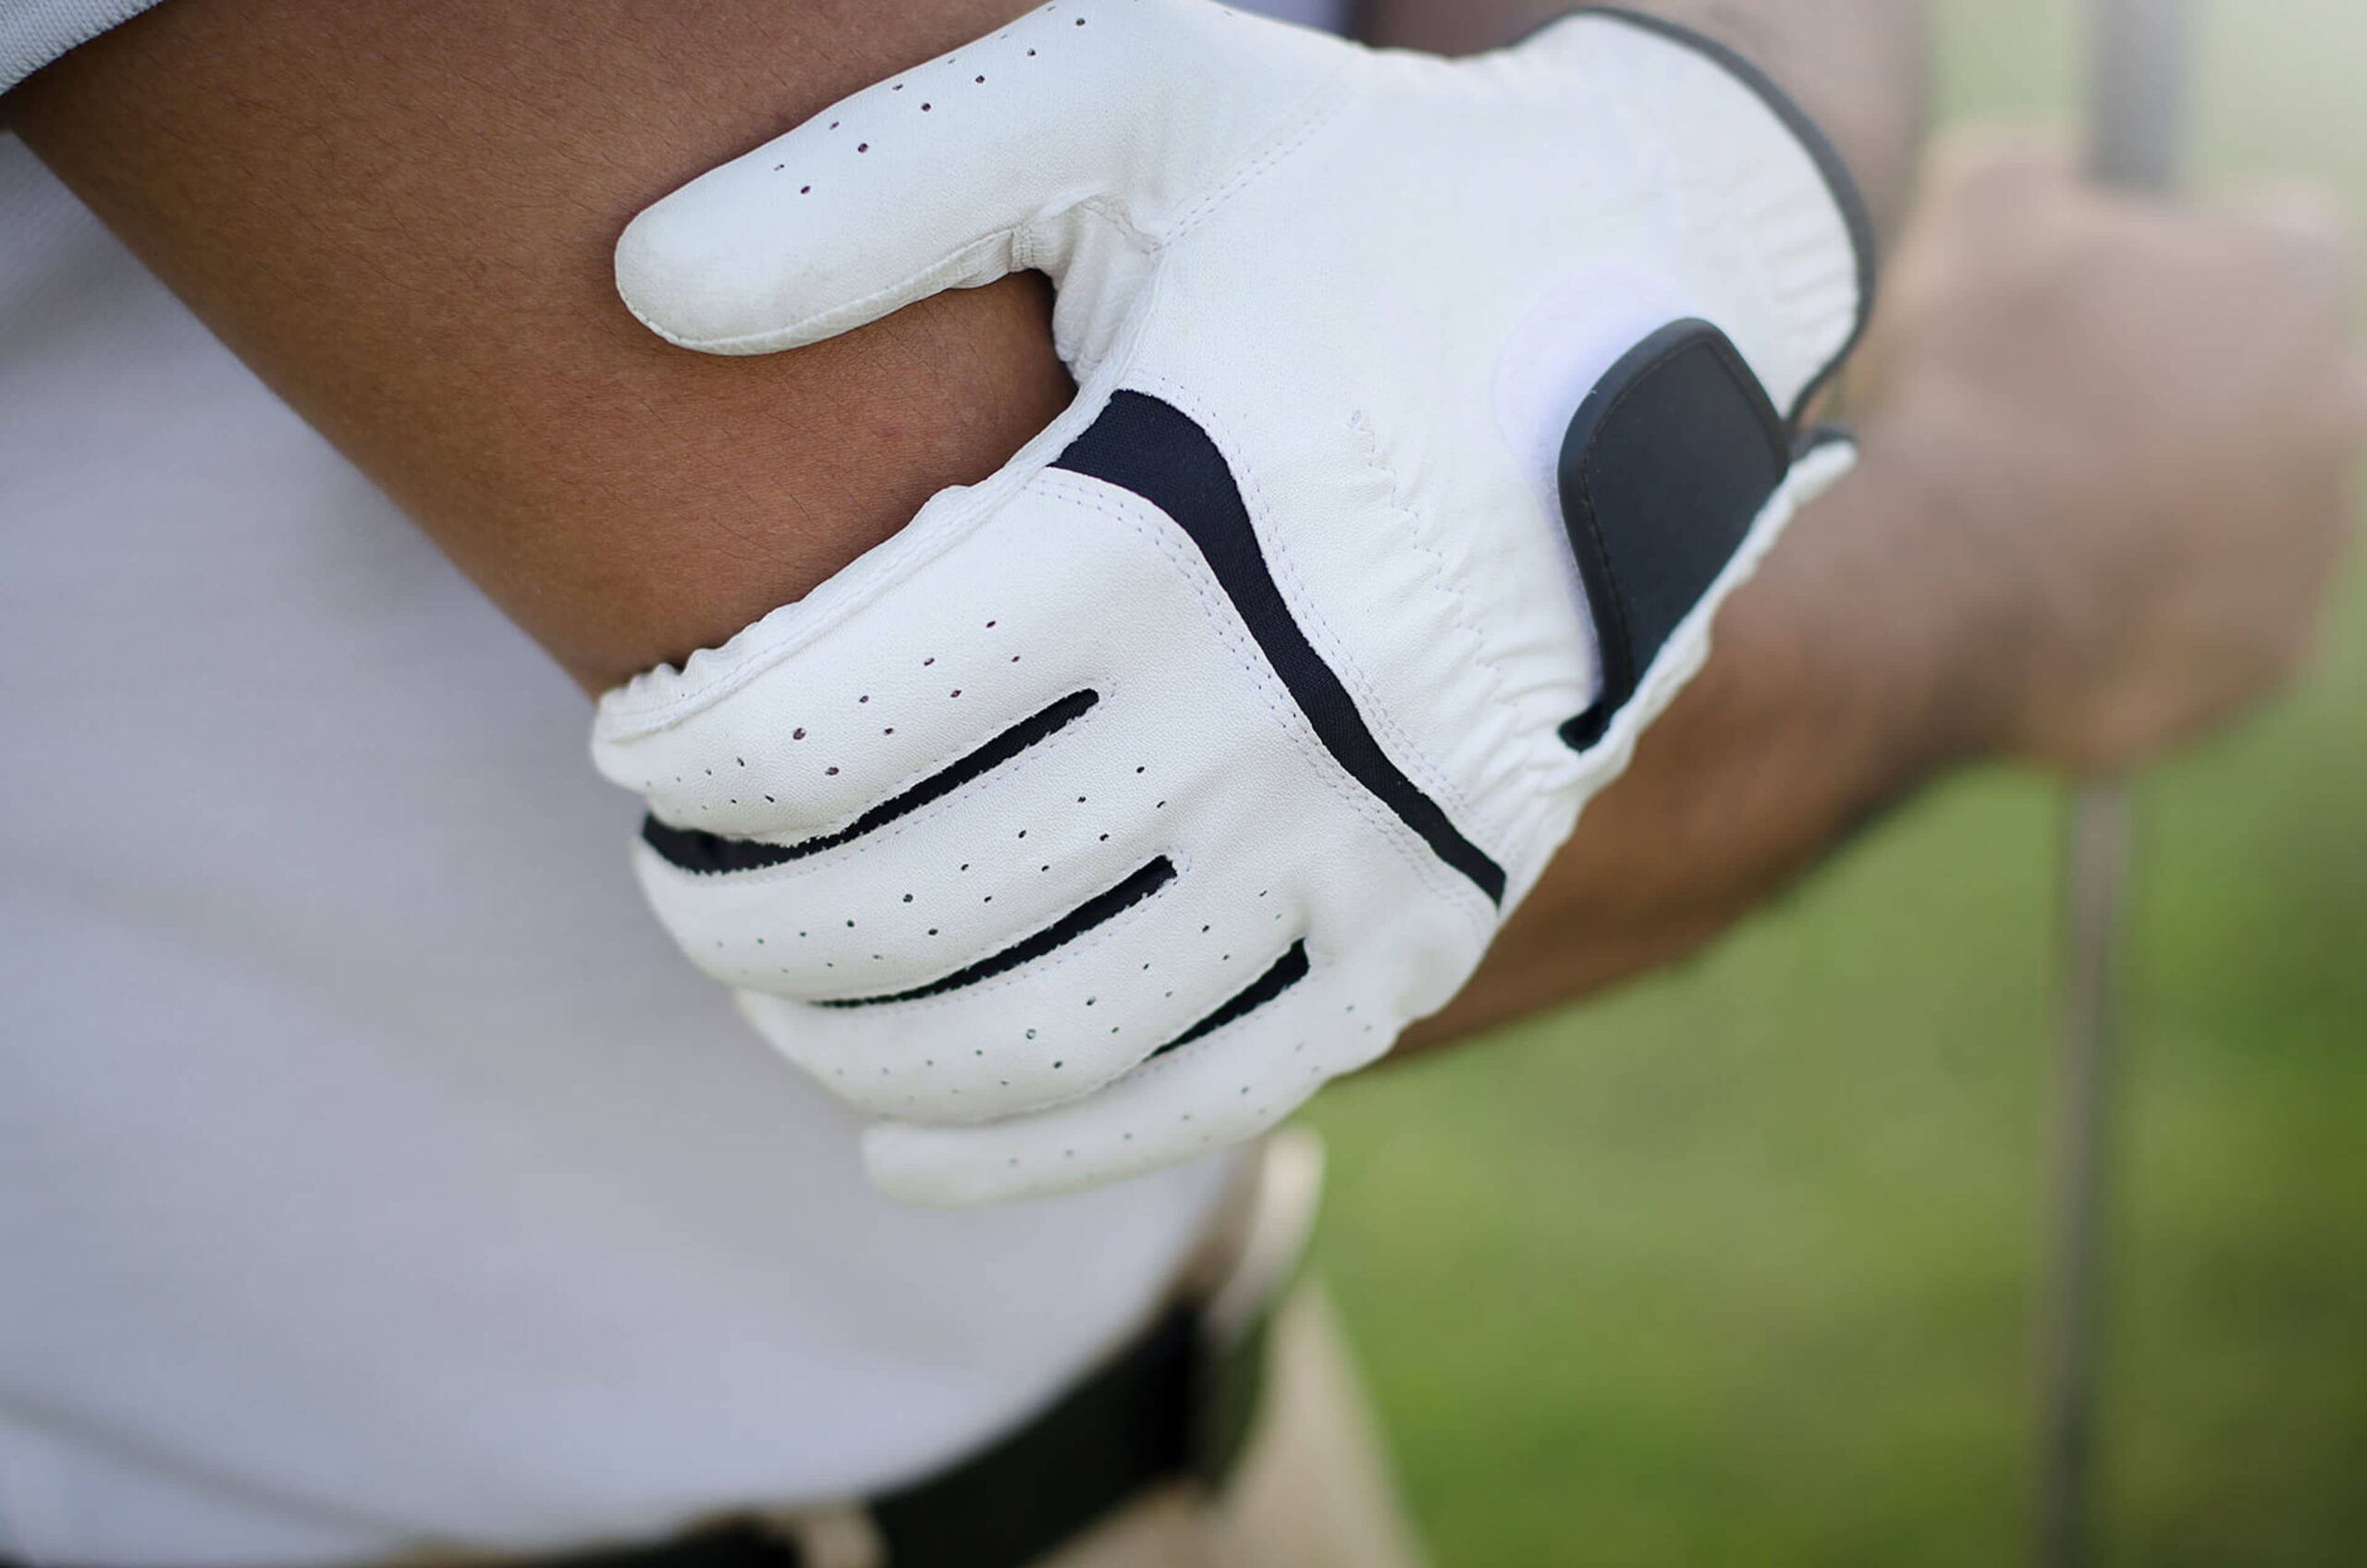 Golfer's elbow frequently occurs in individuals who have to grip objects often, whether it's a golf club or a power tool. G2 Orthopedics treats golfer's elbow so you can get back to golfing or house projects in no time.